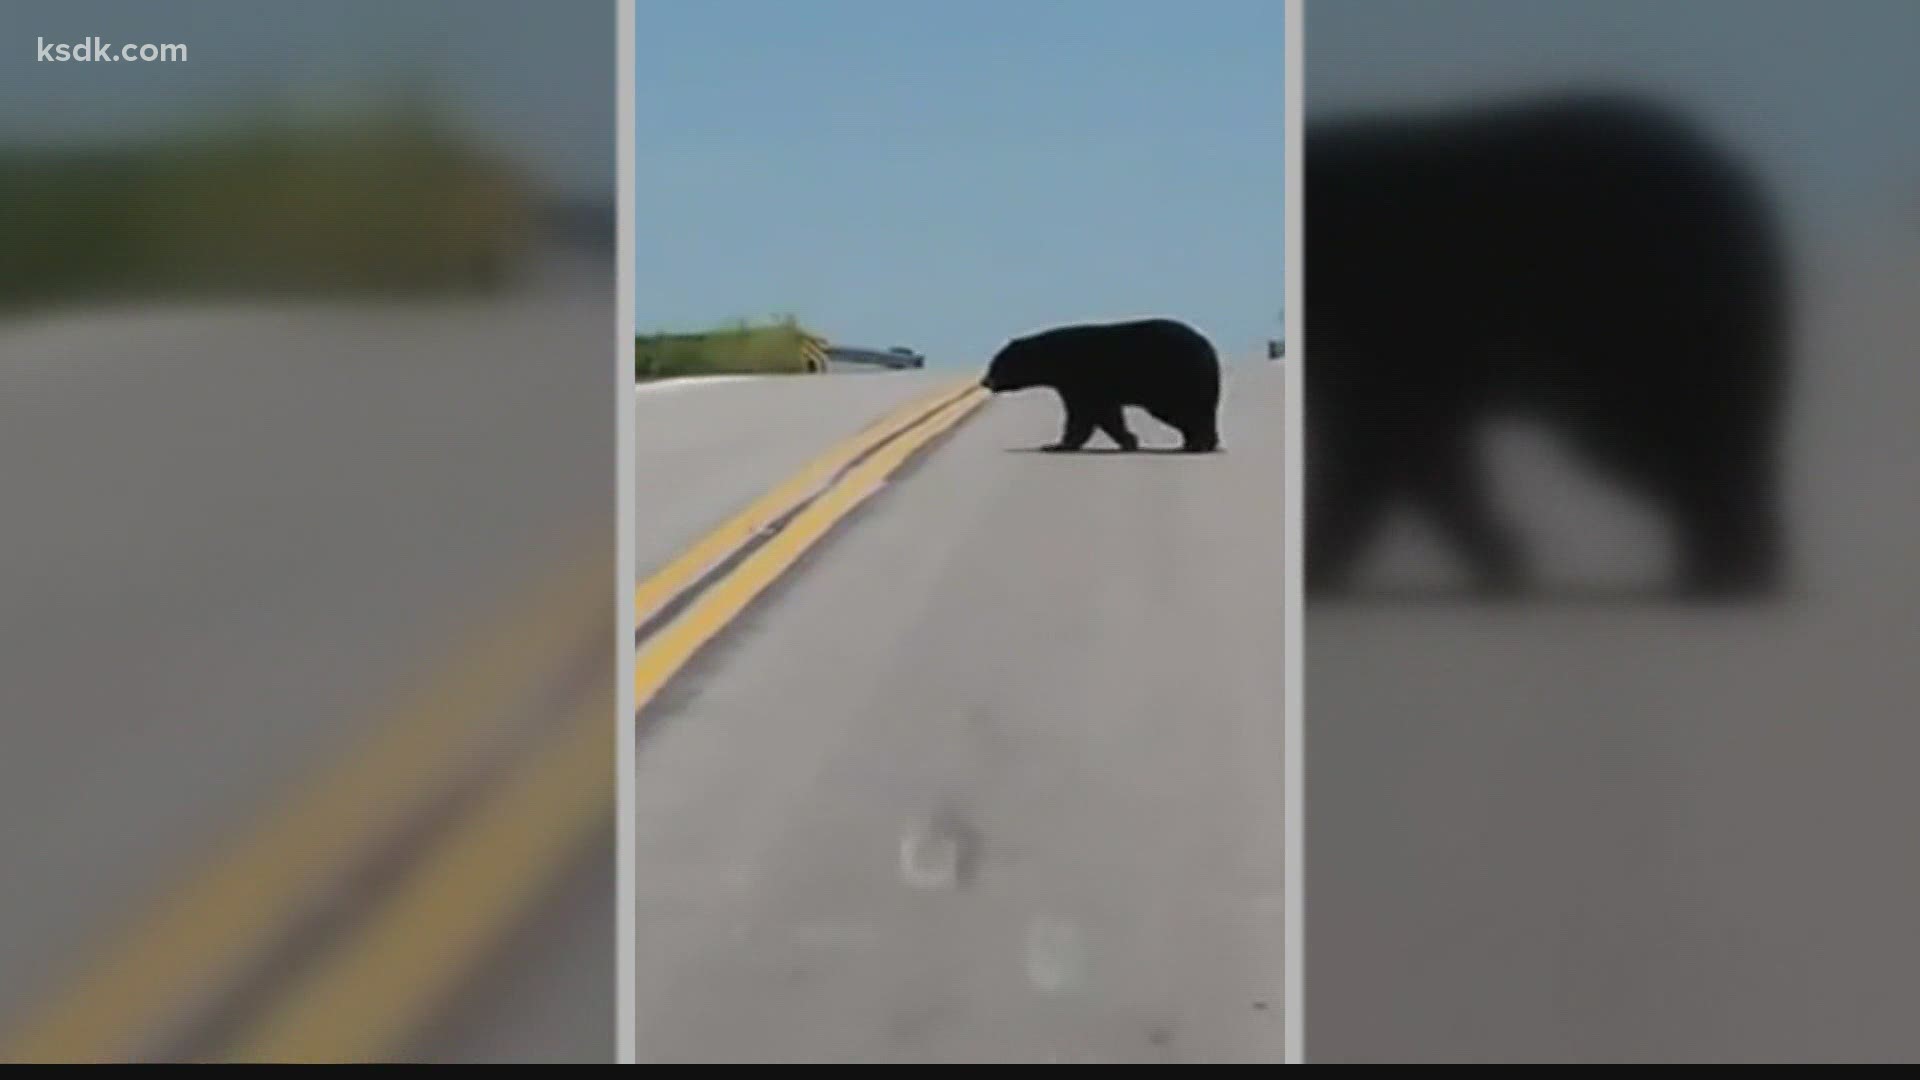 Bear wandered over several states, including Missouri, perhaps searching for a partner